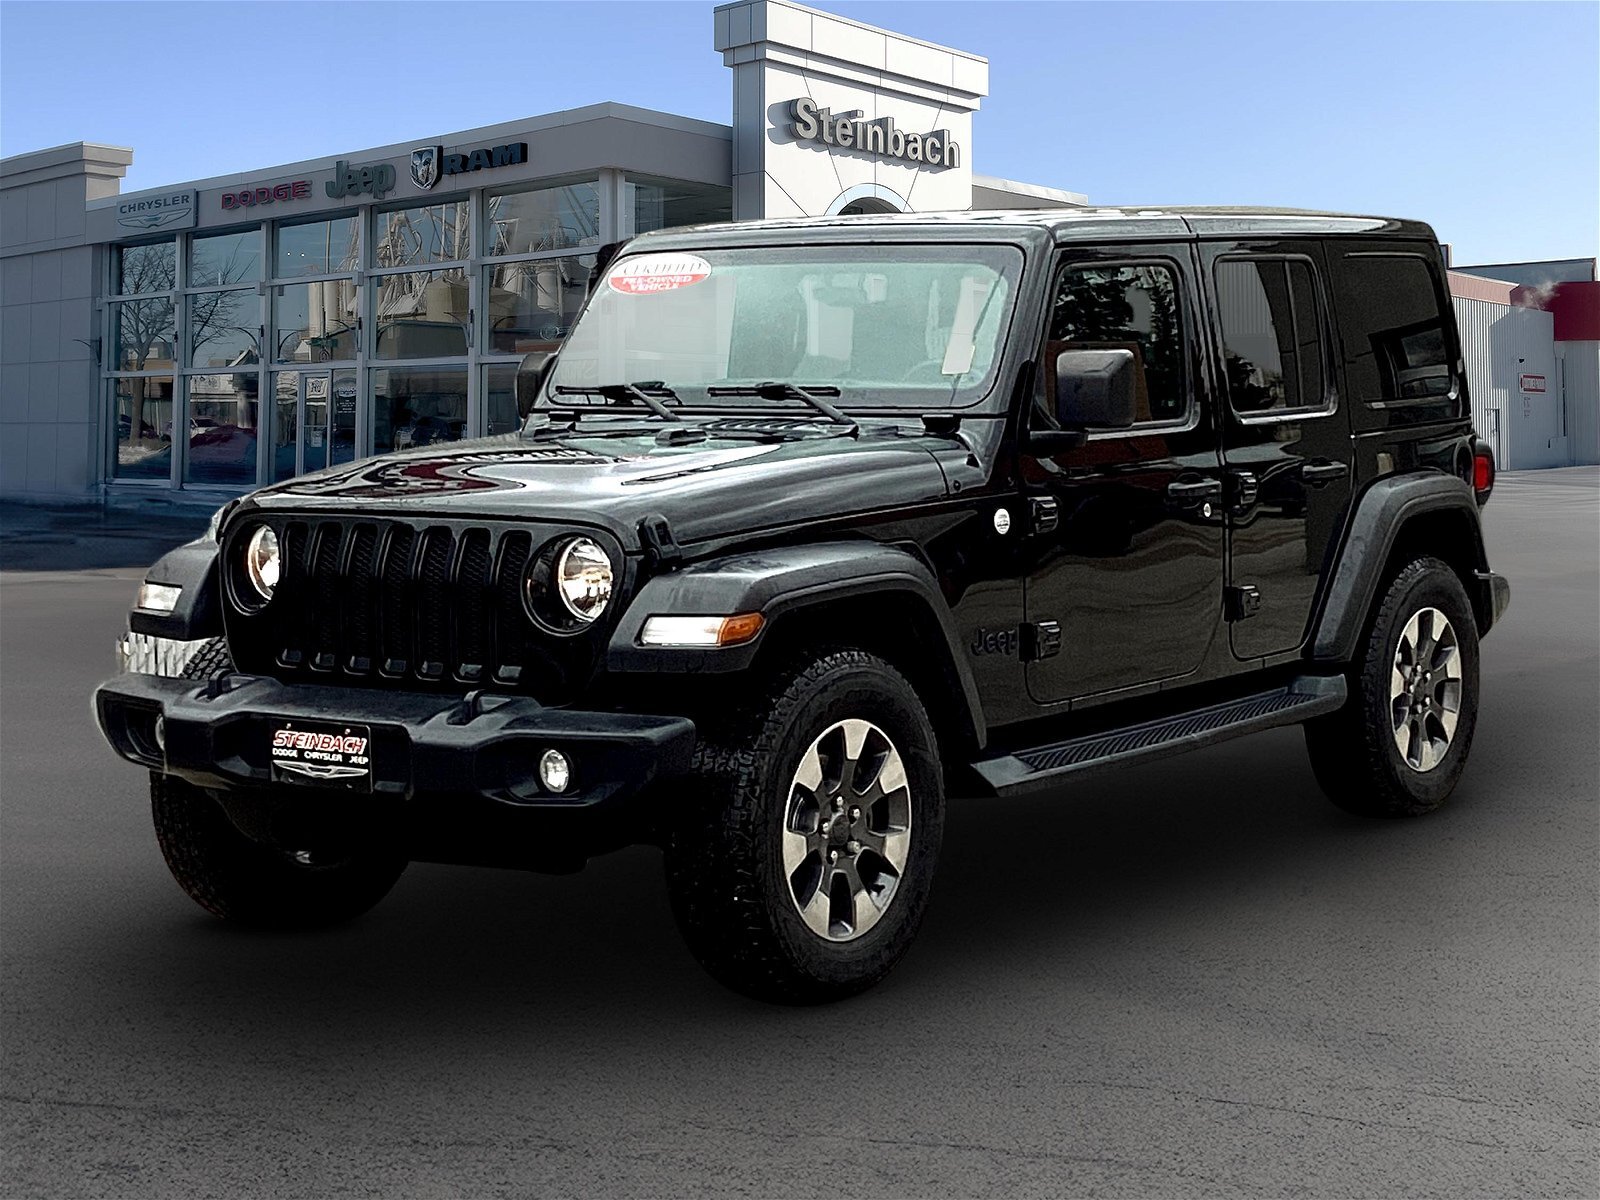 2019 Jeep Wrangler Unlimited Sport | $0 Accidents | Altitude Edition